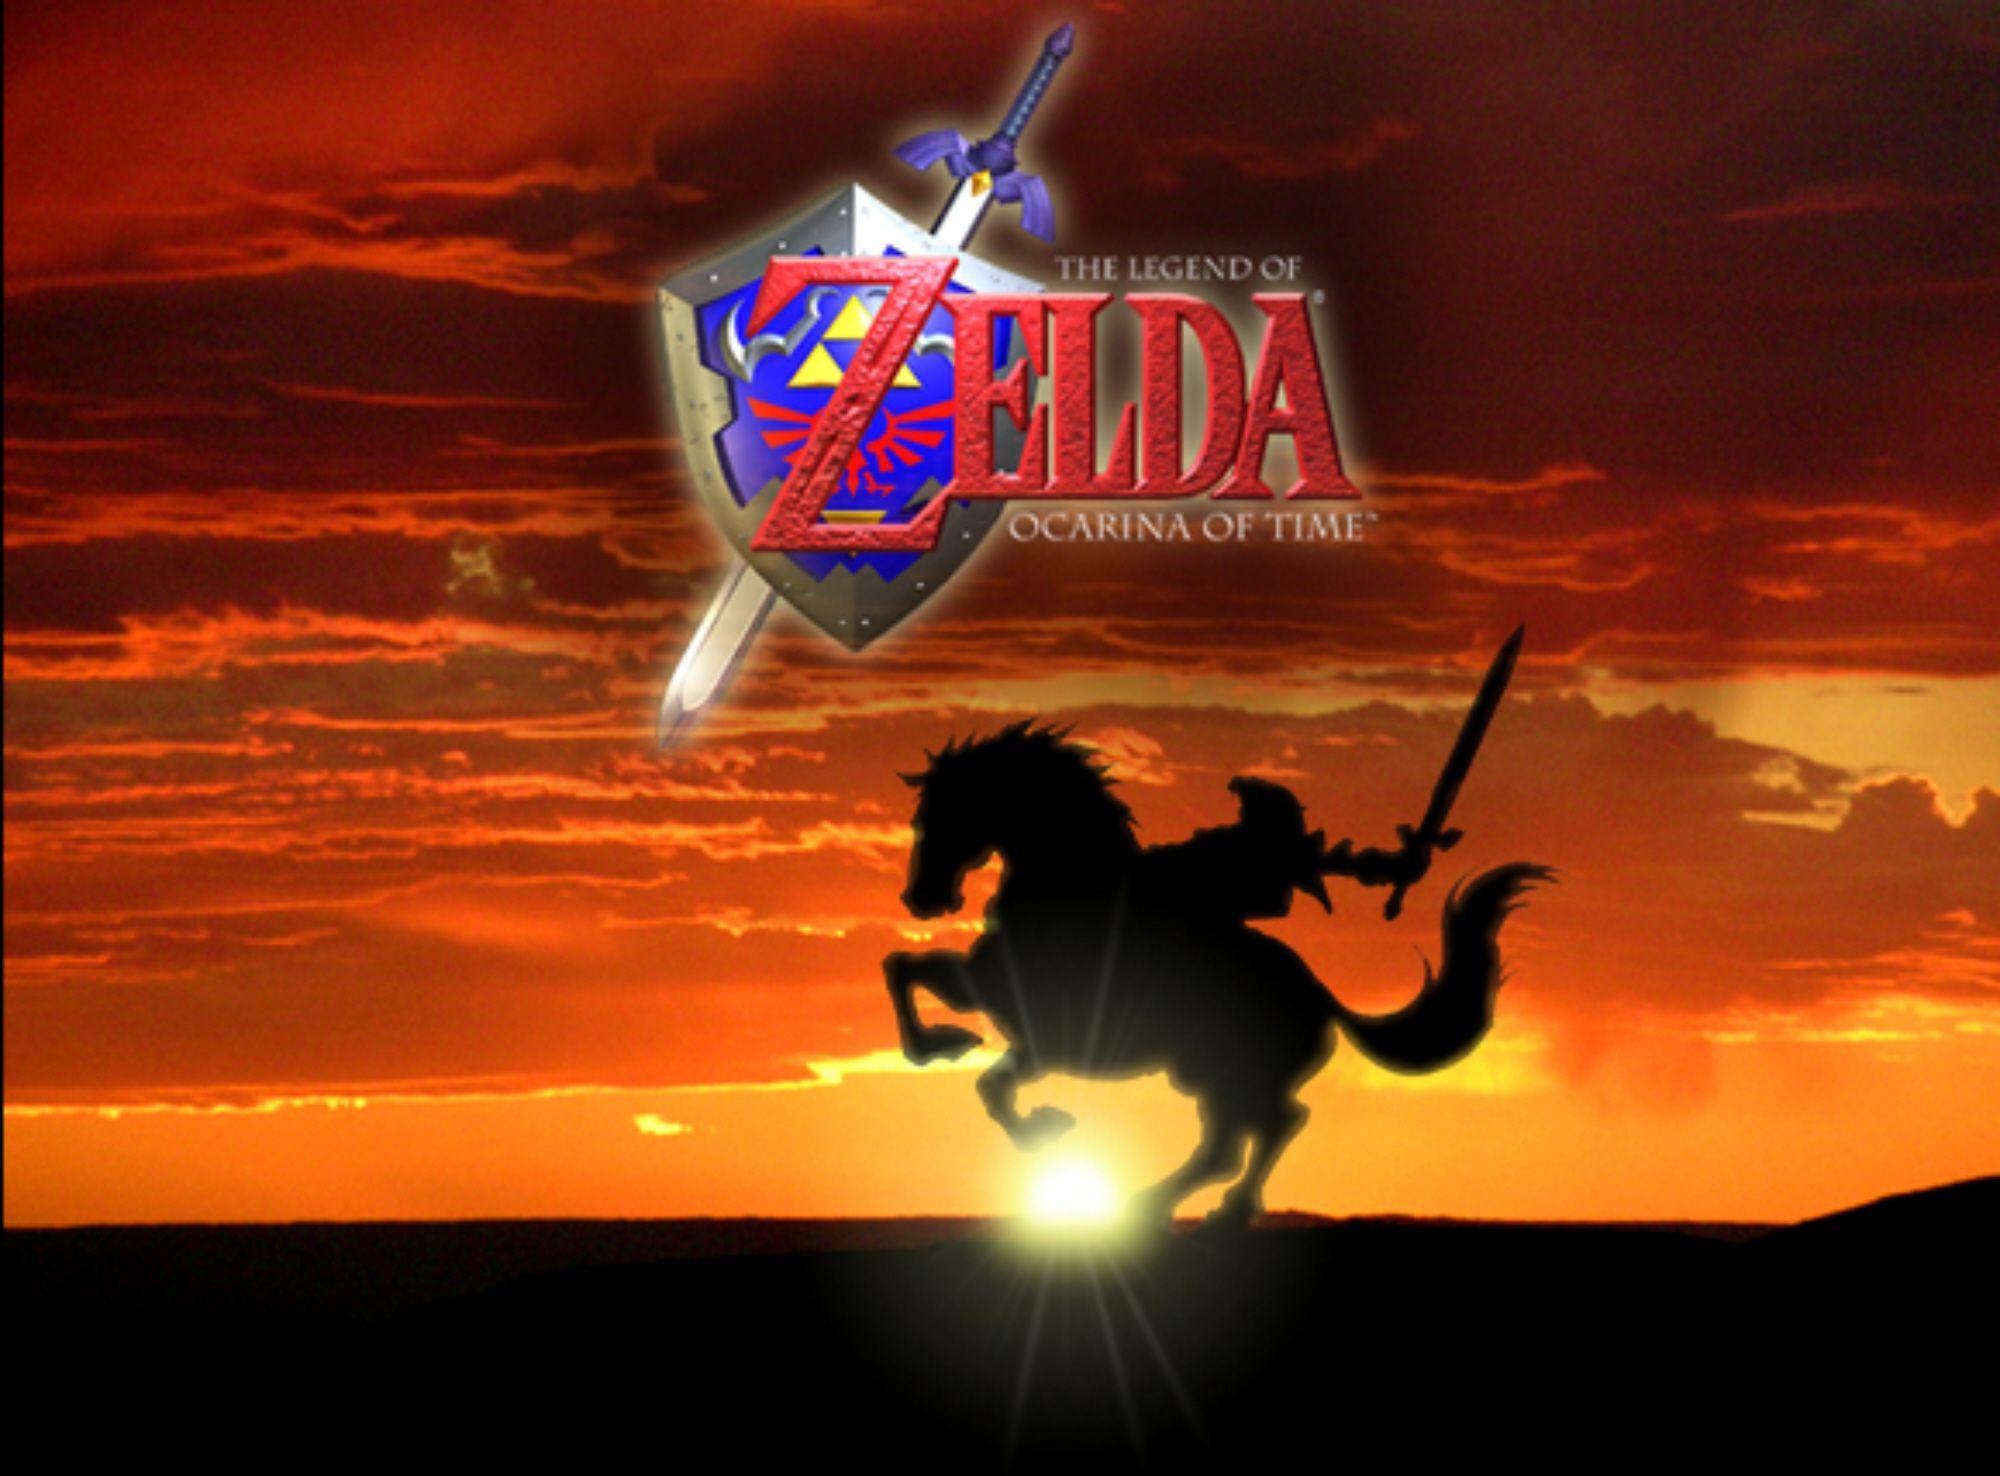 HD Quality The Legend of Zelda Ocarina of Time Wallpaper 6 Game